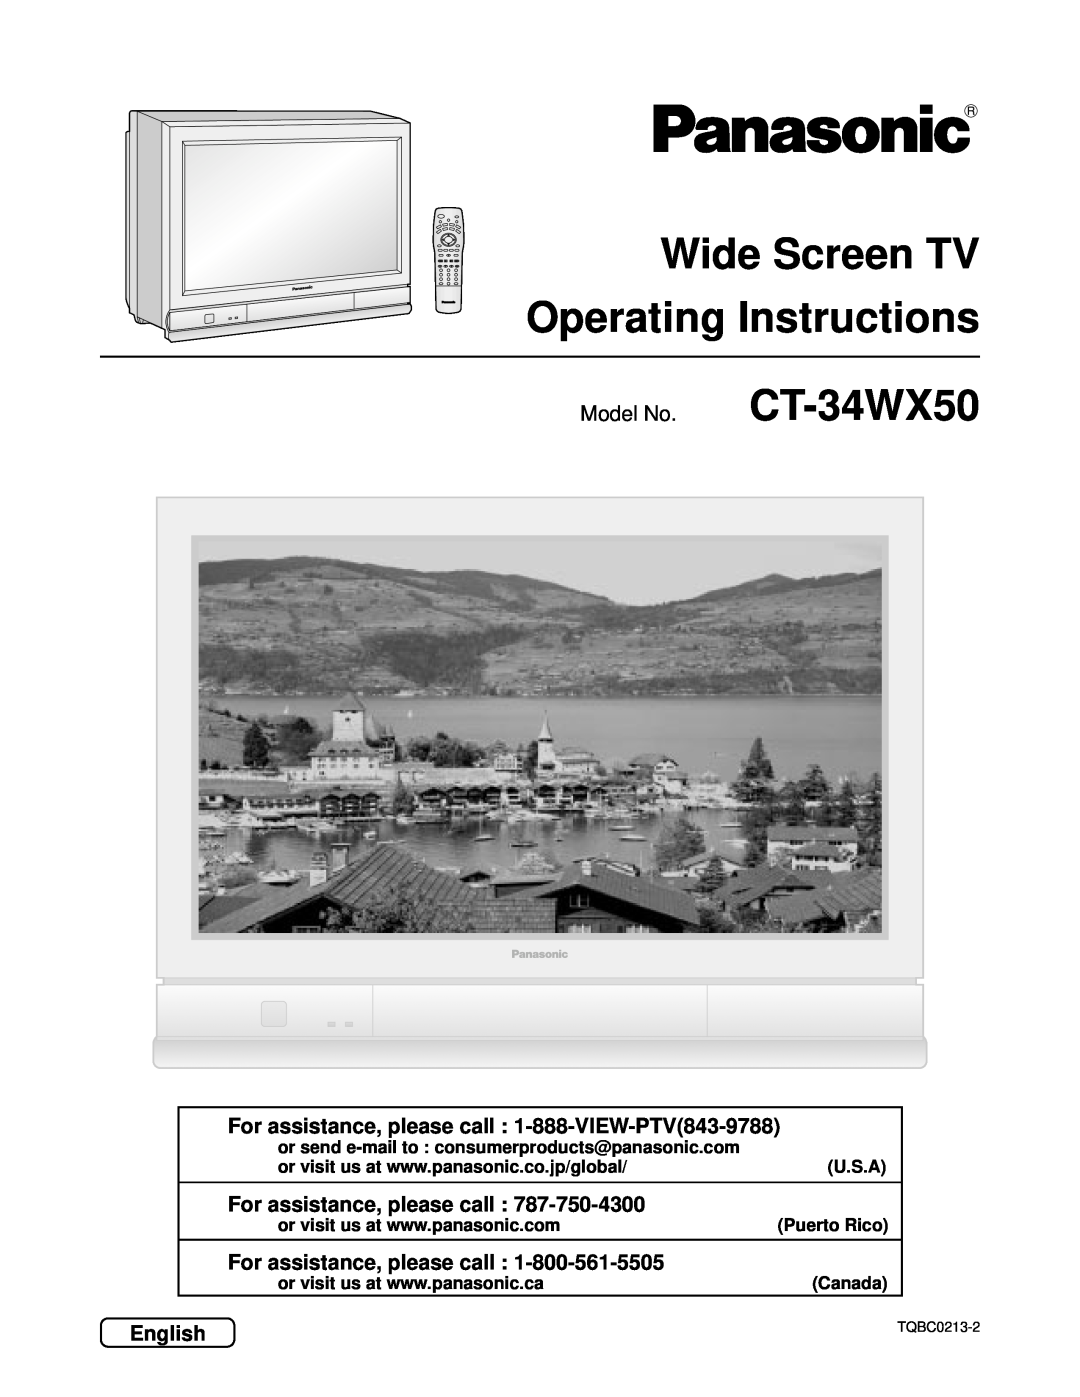 Panasonic CT 34WX50 manual Wide Screen TV Operating Instructions, Model No. CT-34WX50, For assistance, please call 